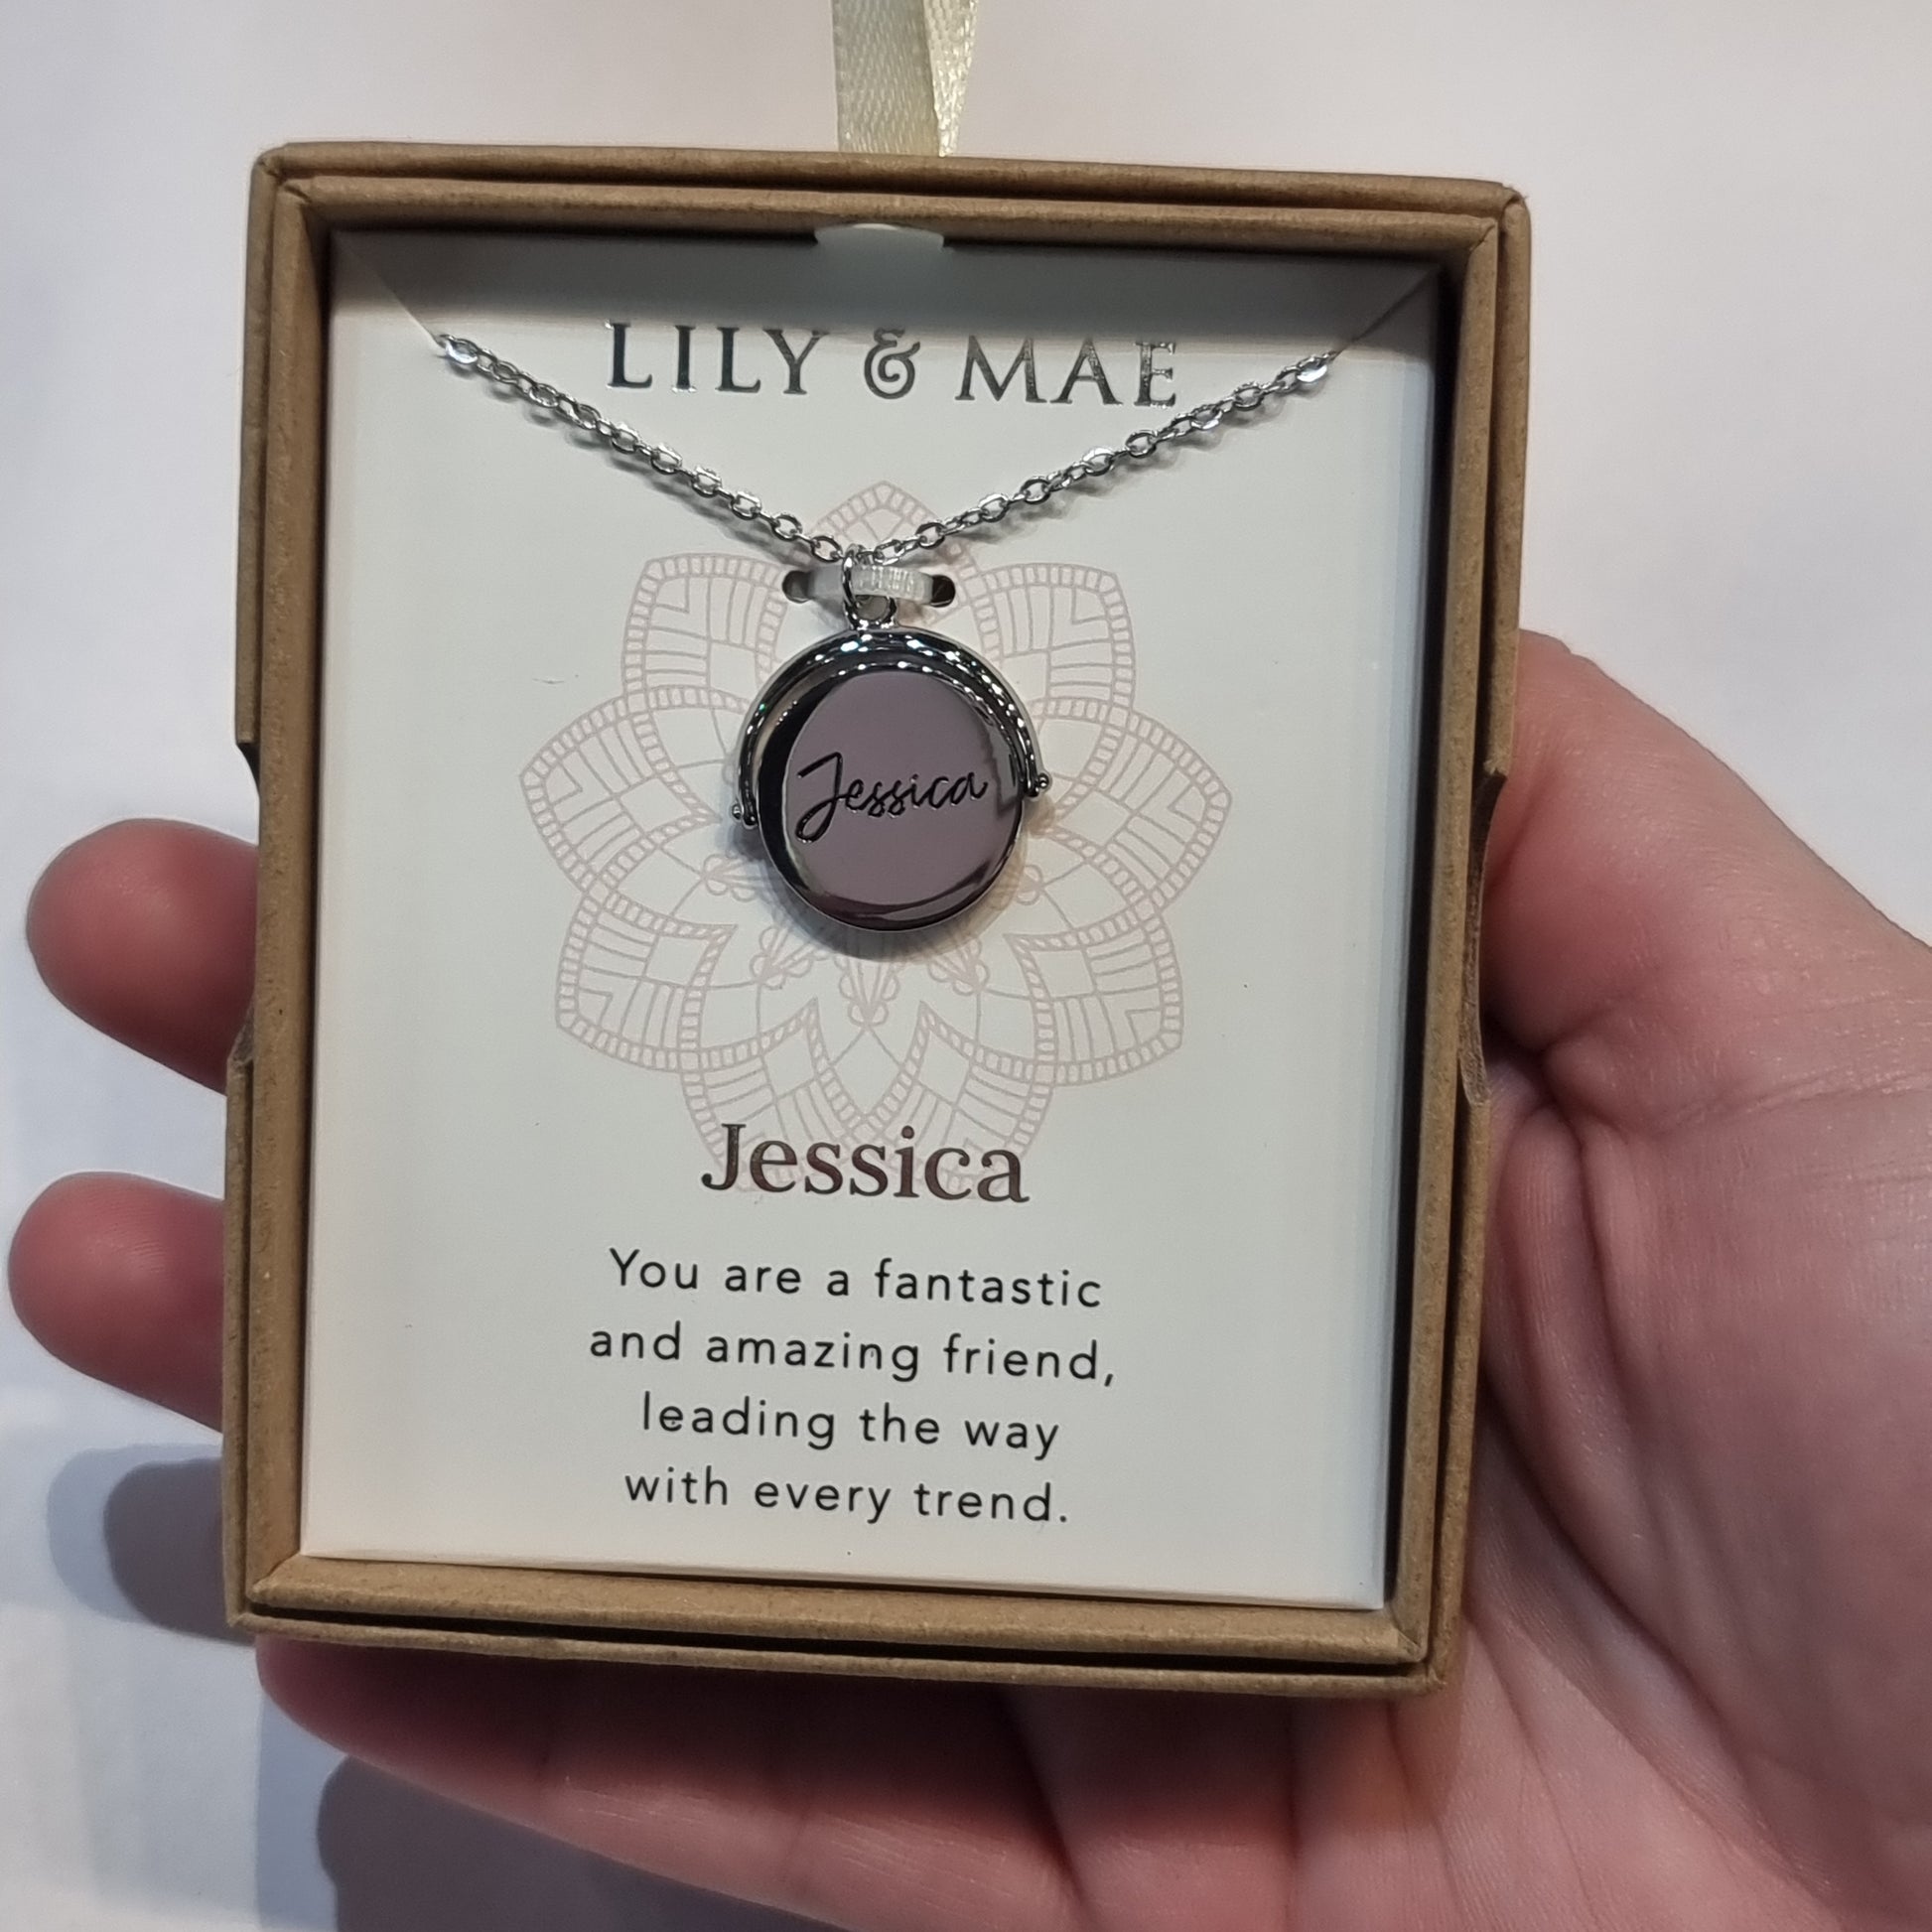 L&M spinning necklace - Jessica - Rivendell Shop